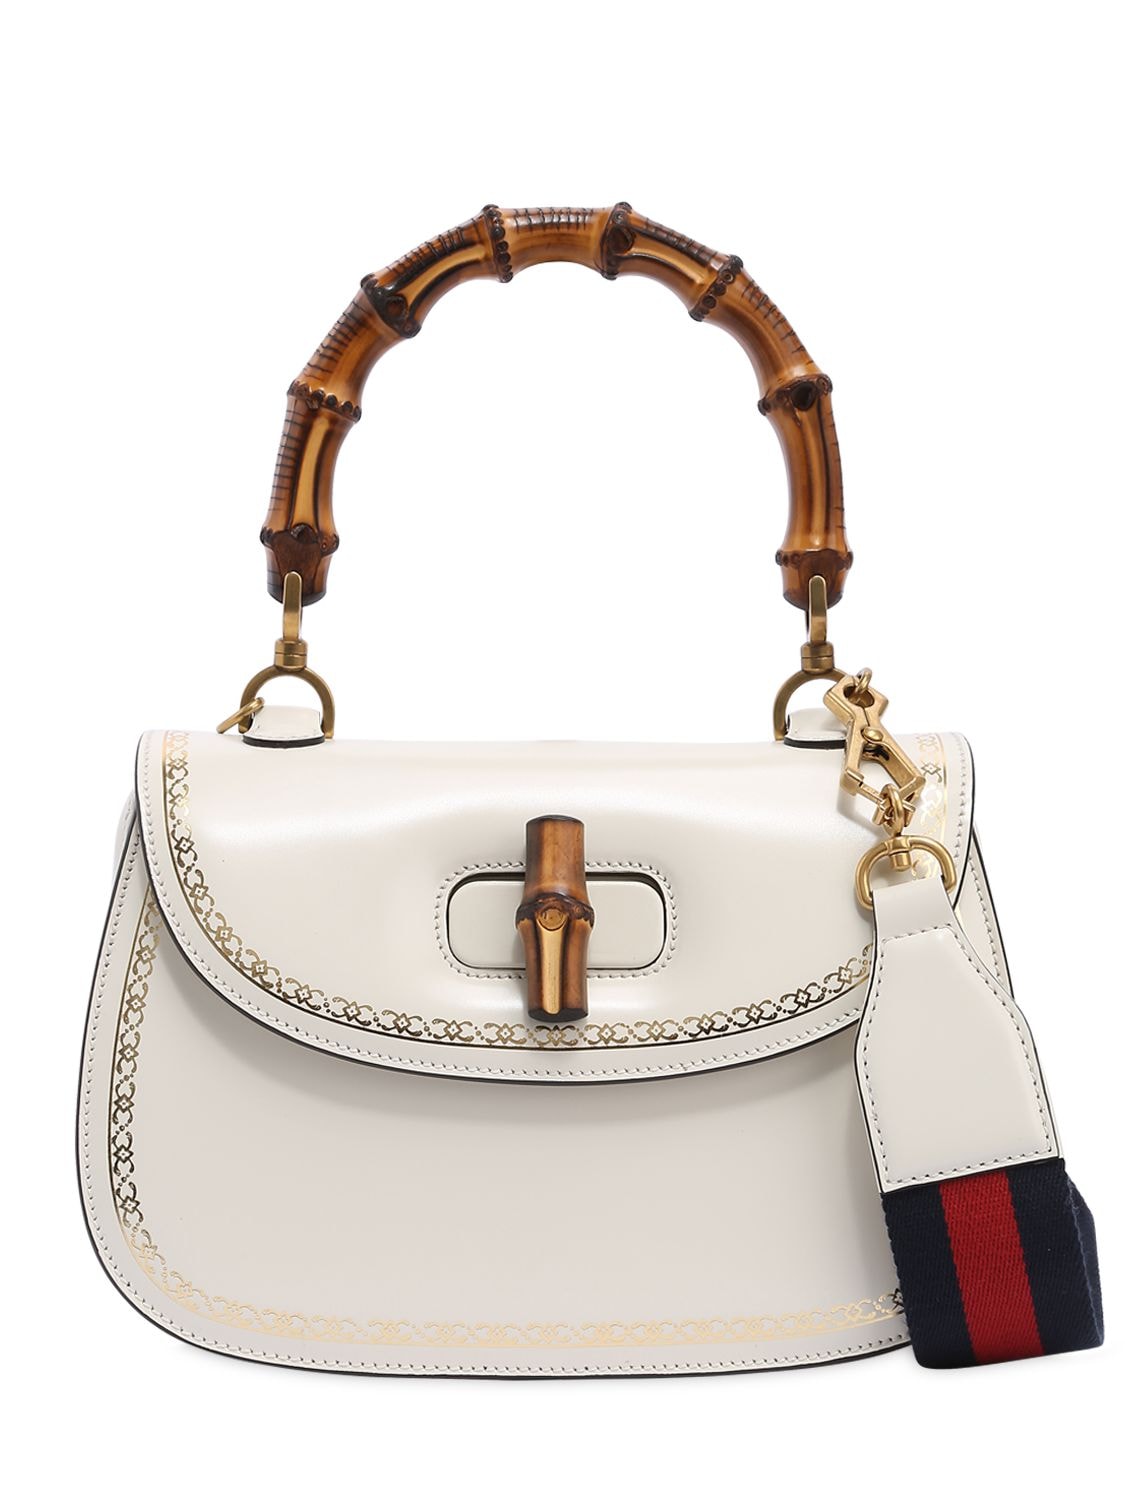 Gucci Bamboo & Leather Top Handle Bag In White | ModeSens